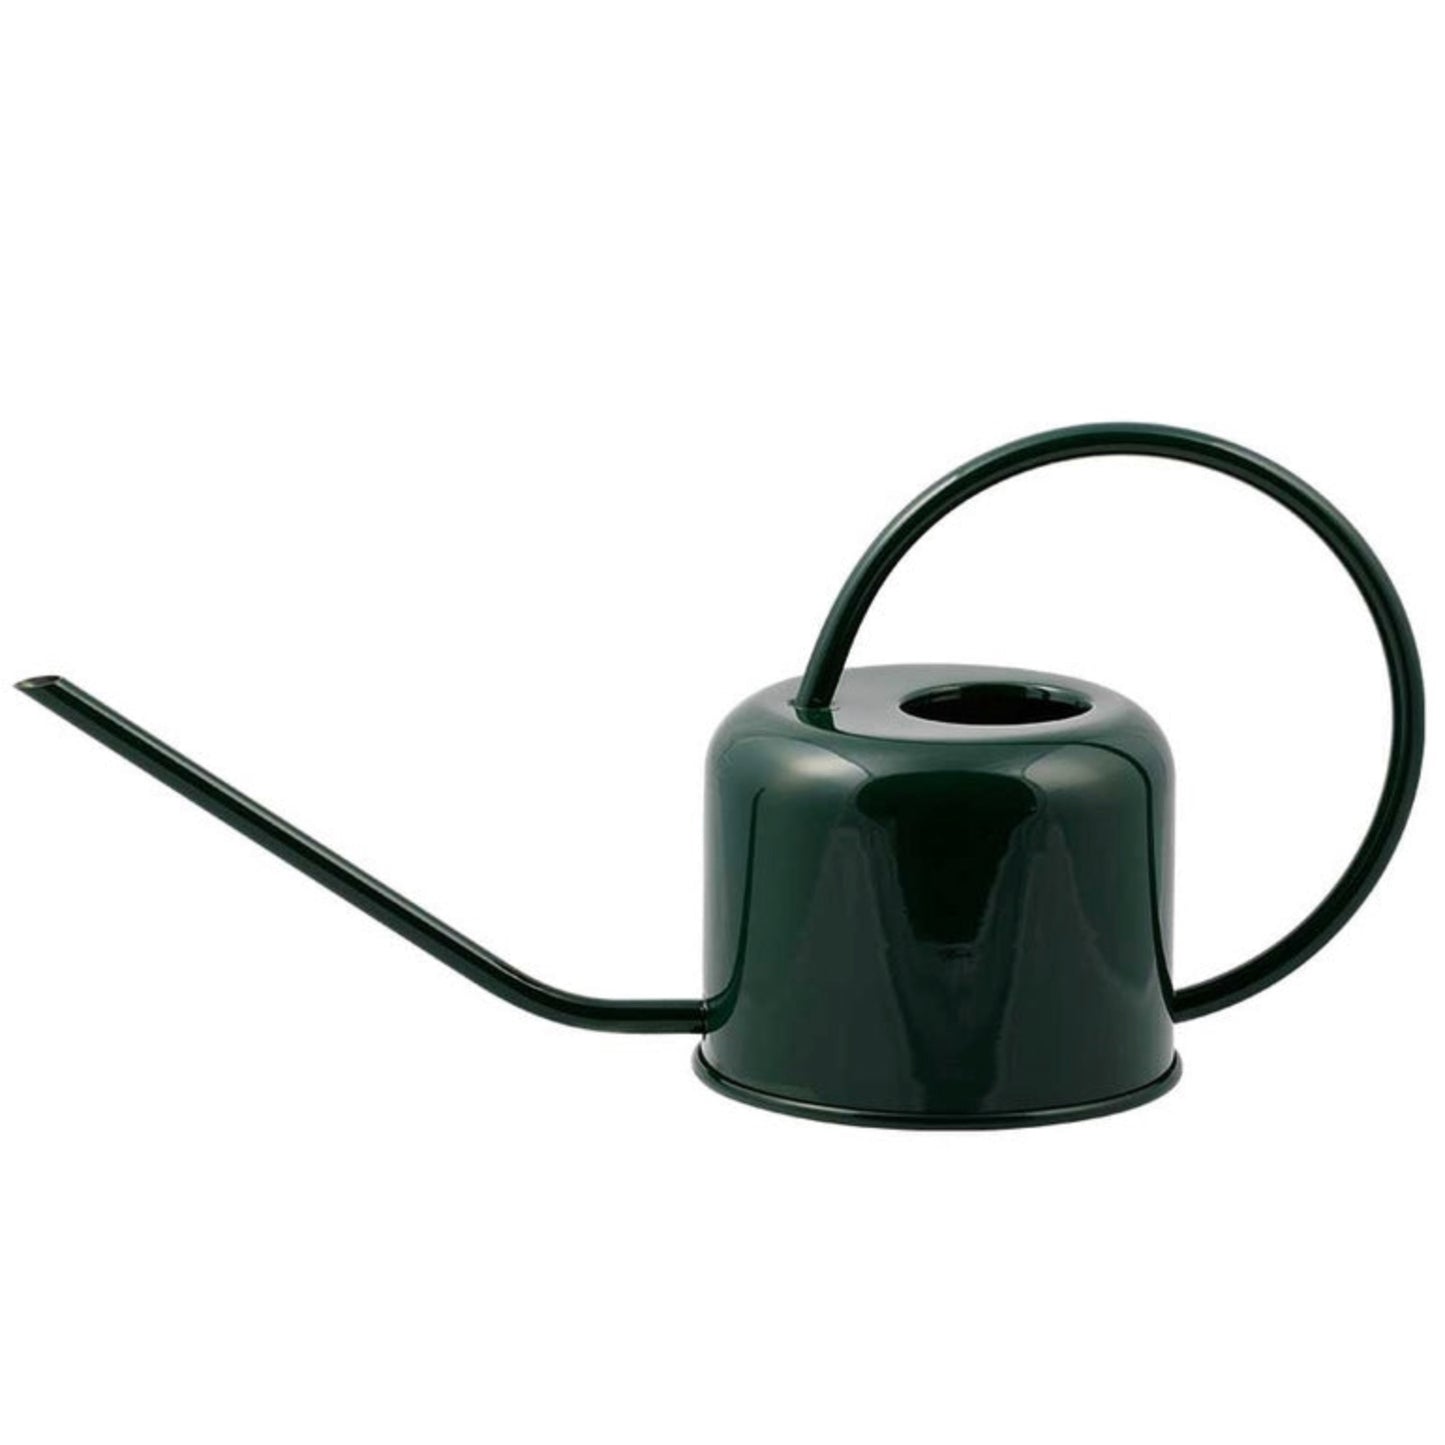 Plint watering can for indoor plants, 0.9 litre, various colours